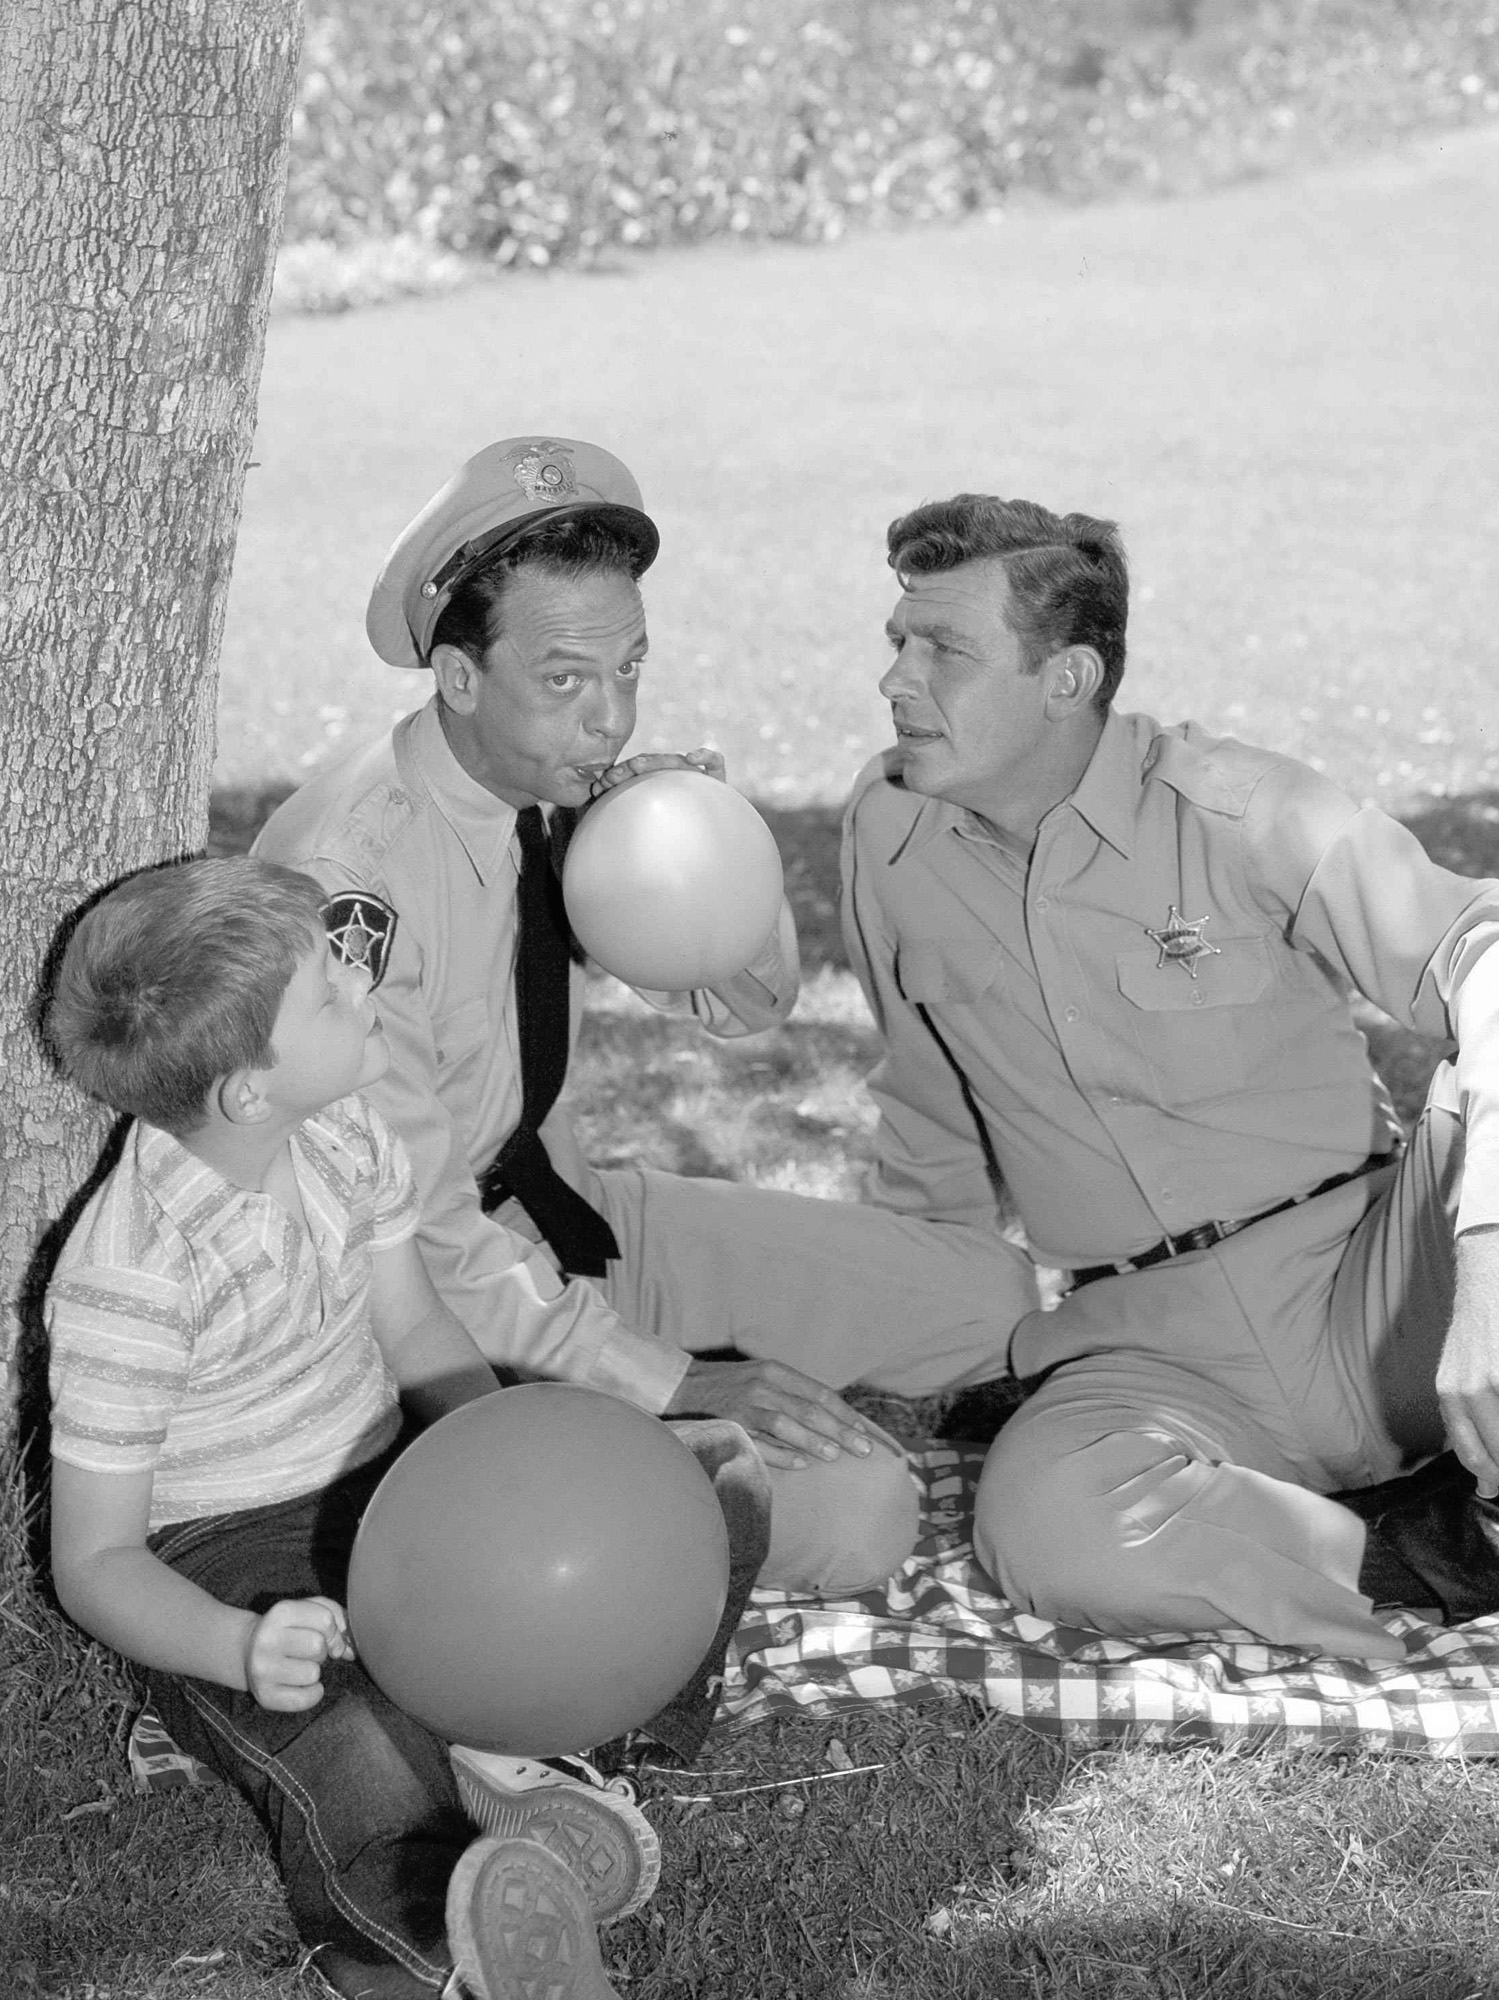 Ron Howard, left, with Don Knotts and Andy Griffith